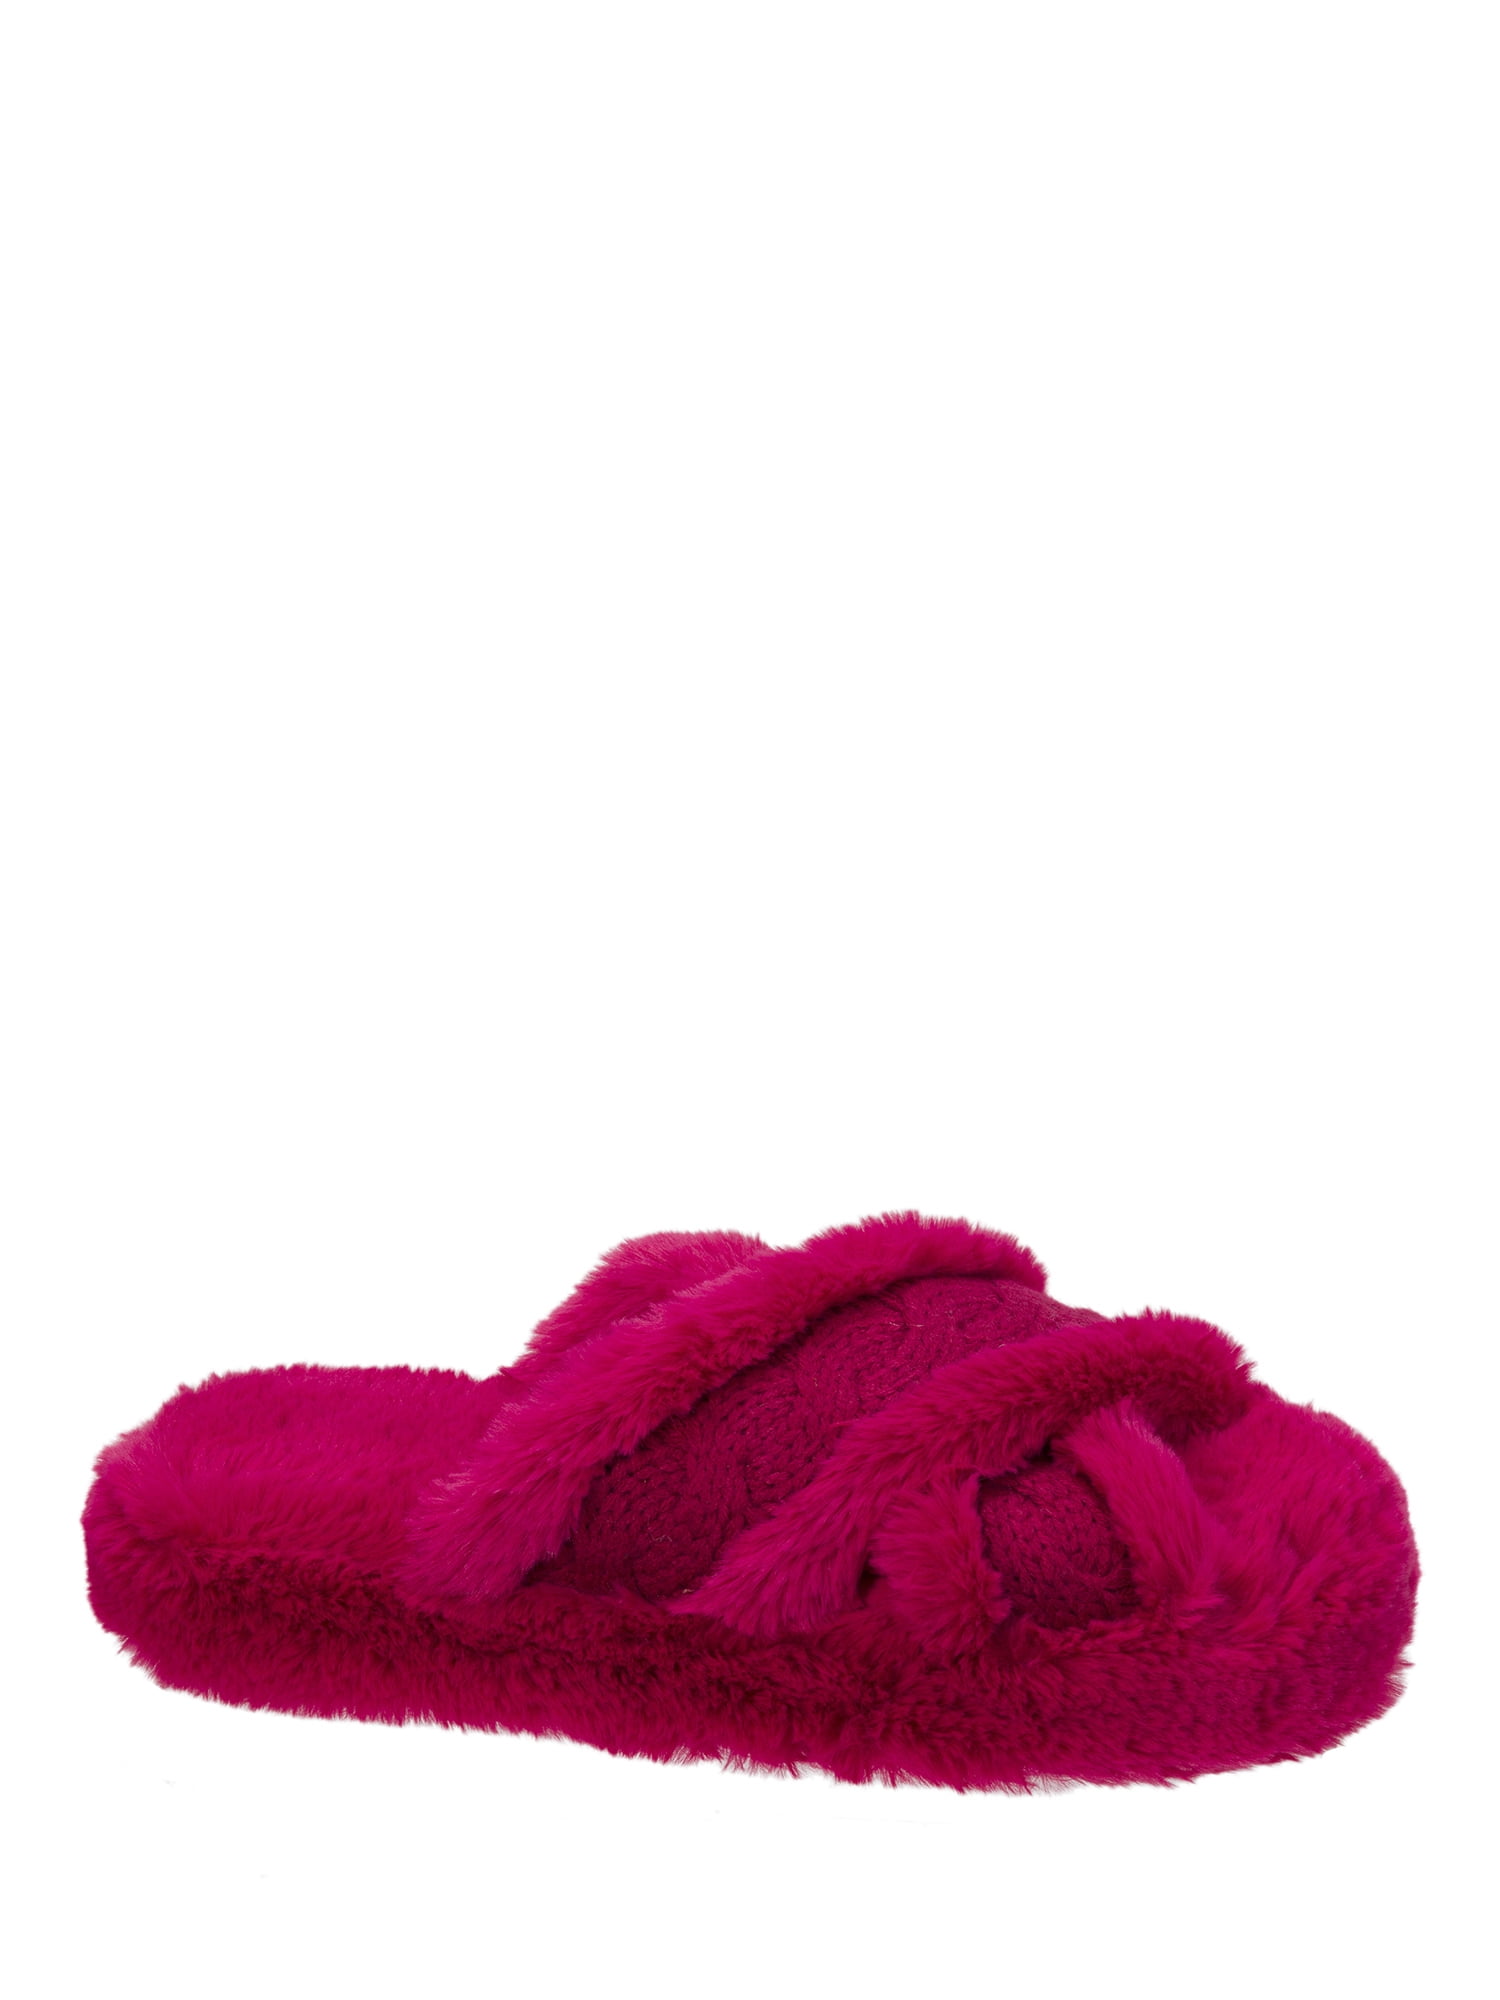 Dearfoams Women's Cable and Pile Crossband Slippers - Walmart.com